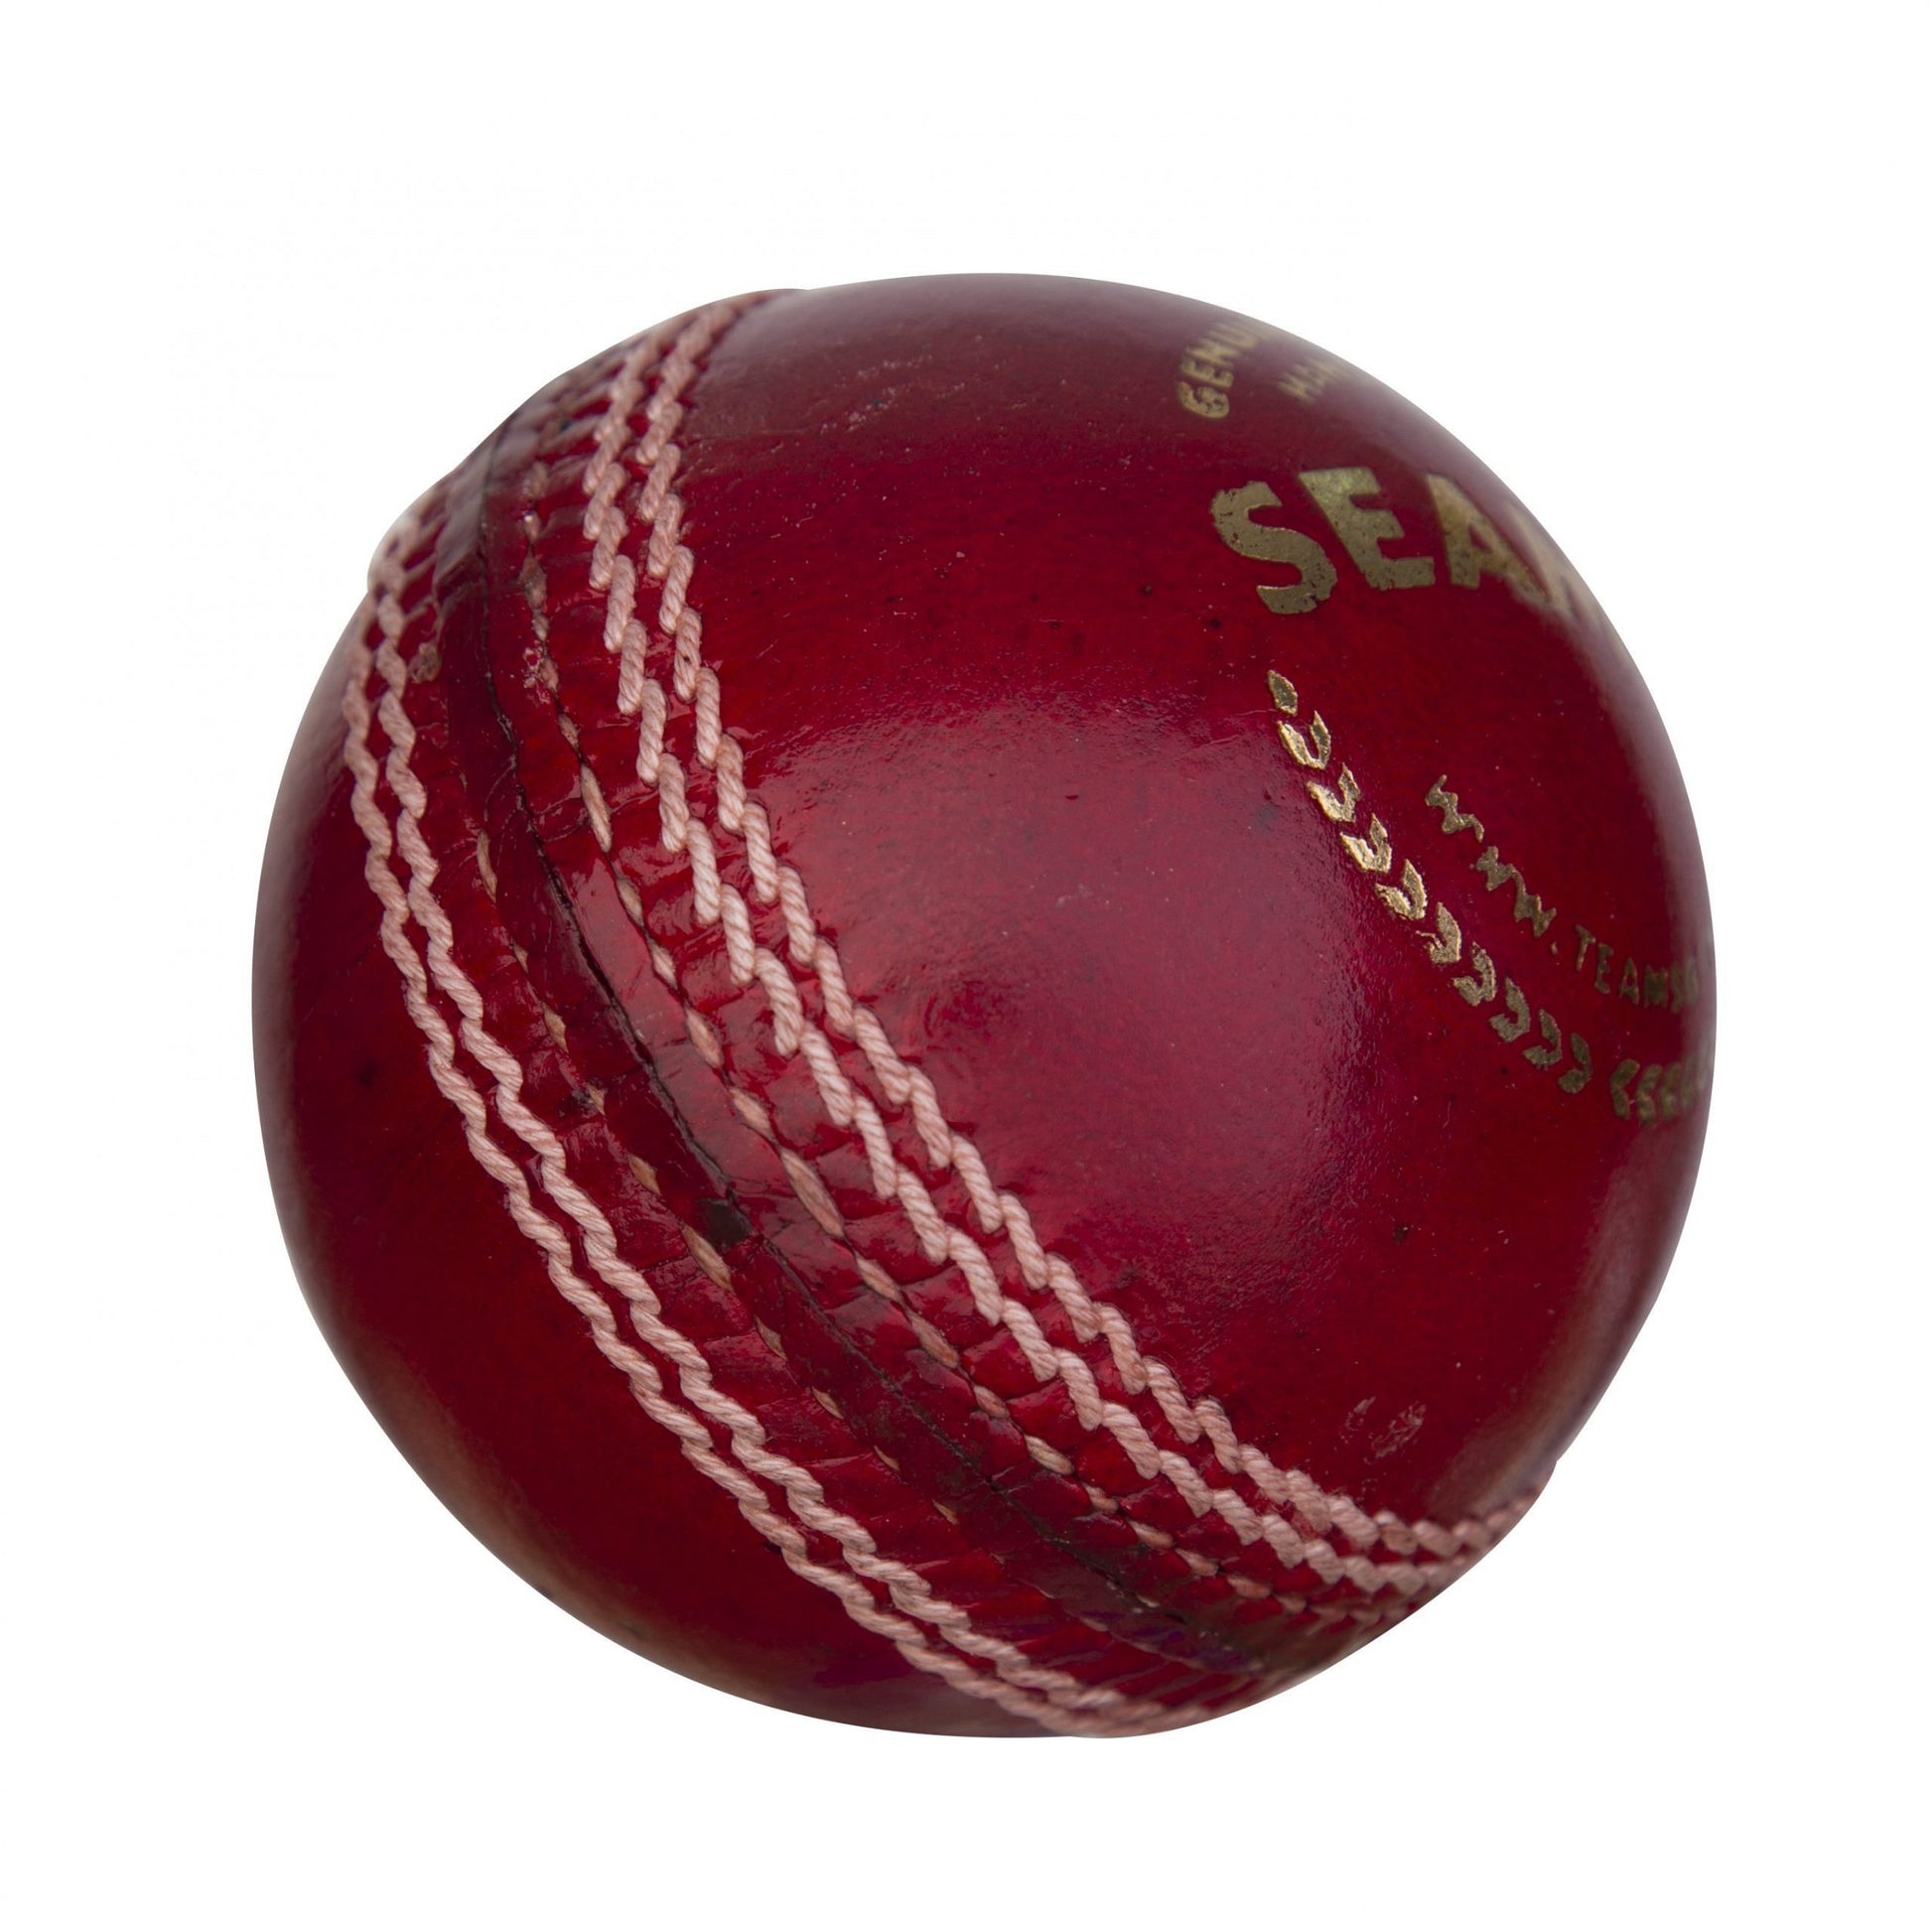 SG Seamer Good Quality Two-Piece Water Proof Cricket Leather Ball